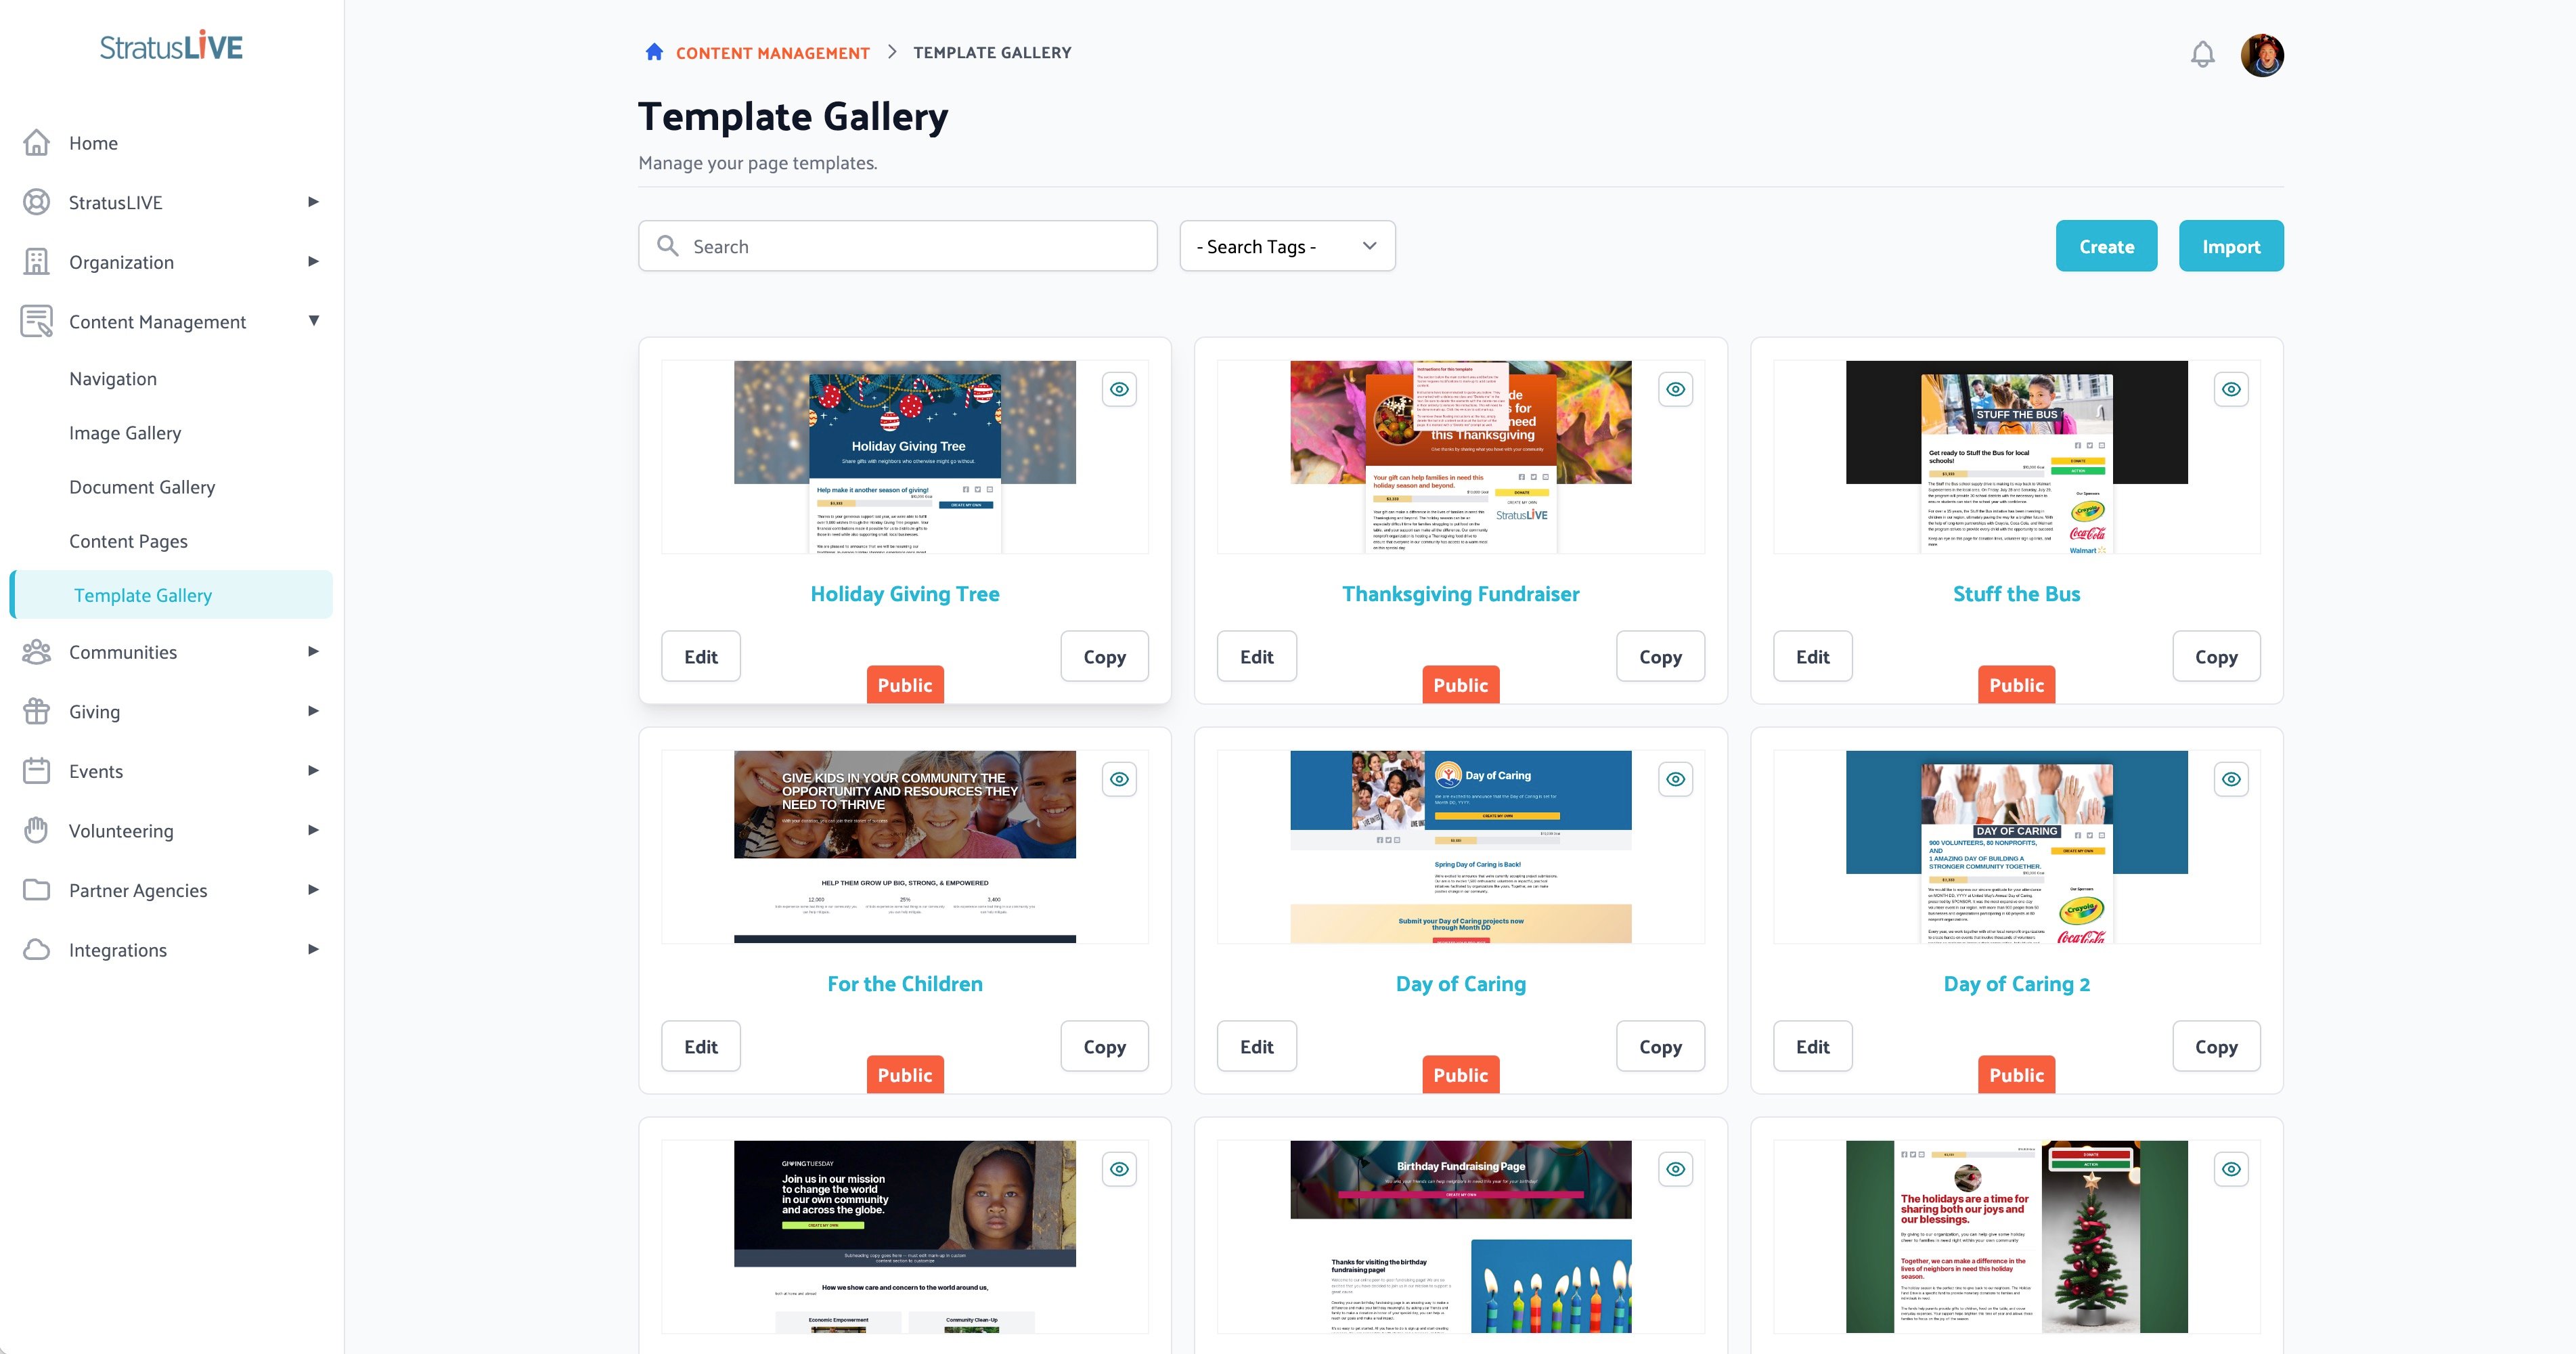 Content Management < Template Gallery